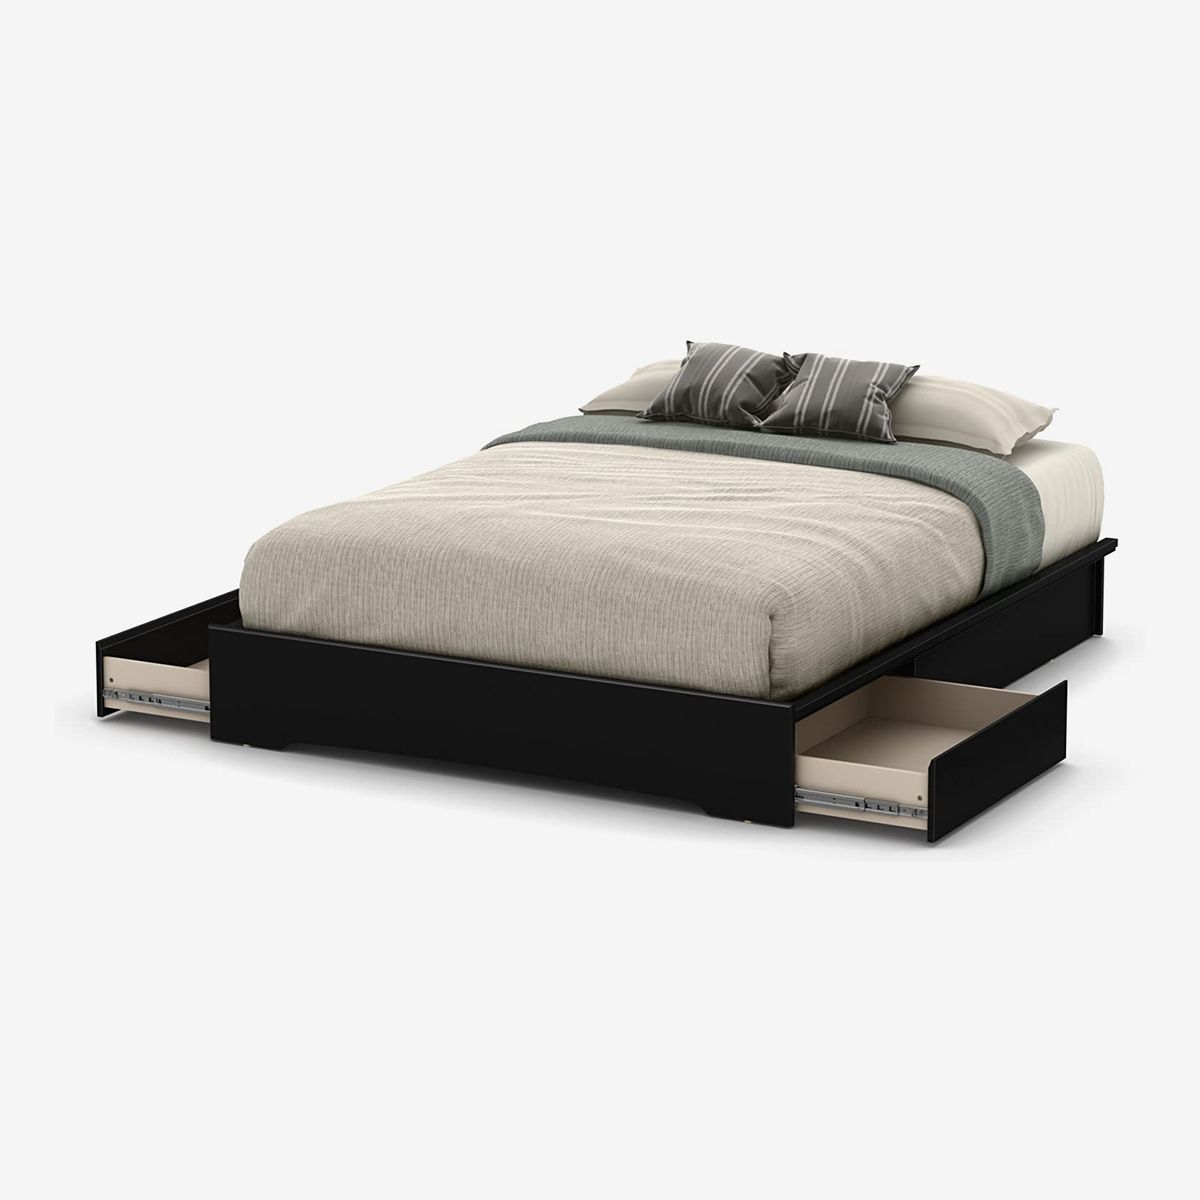 Modern Platform Beds With Storage, Diy Rustic Queen Bed Frame With Storage Boxes White Luröy